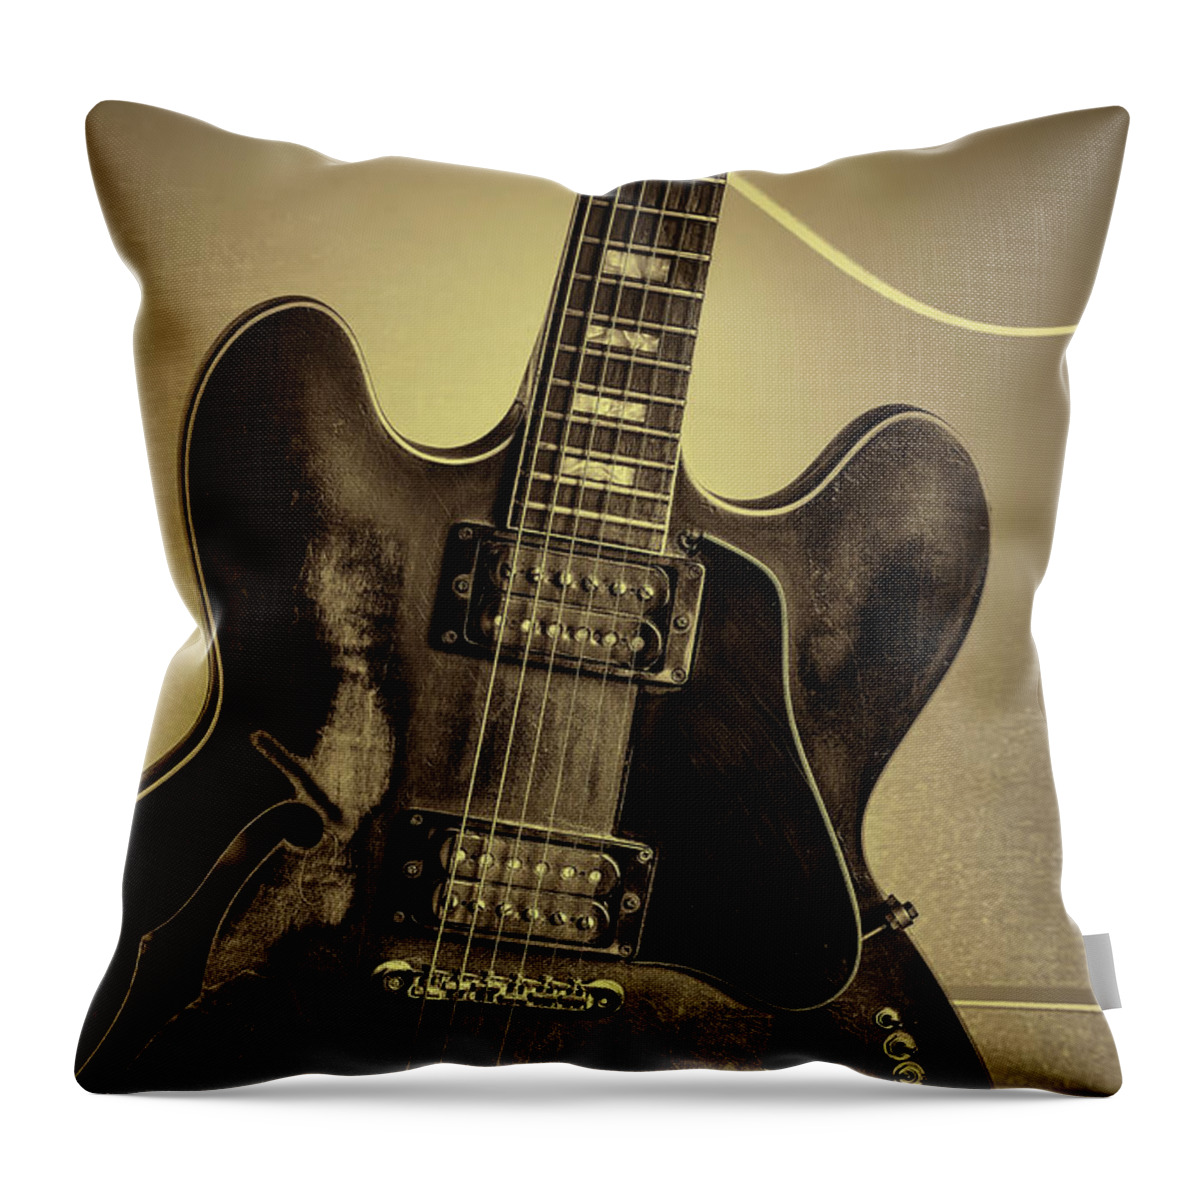 Music-instruments Throw Pillow featuring the photograph Music Picture Gibson Guitar 1744.012 by M K Miller